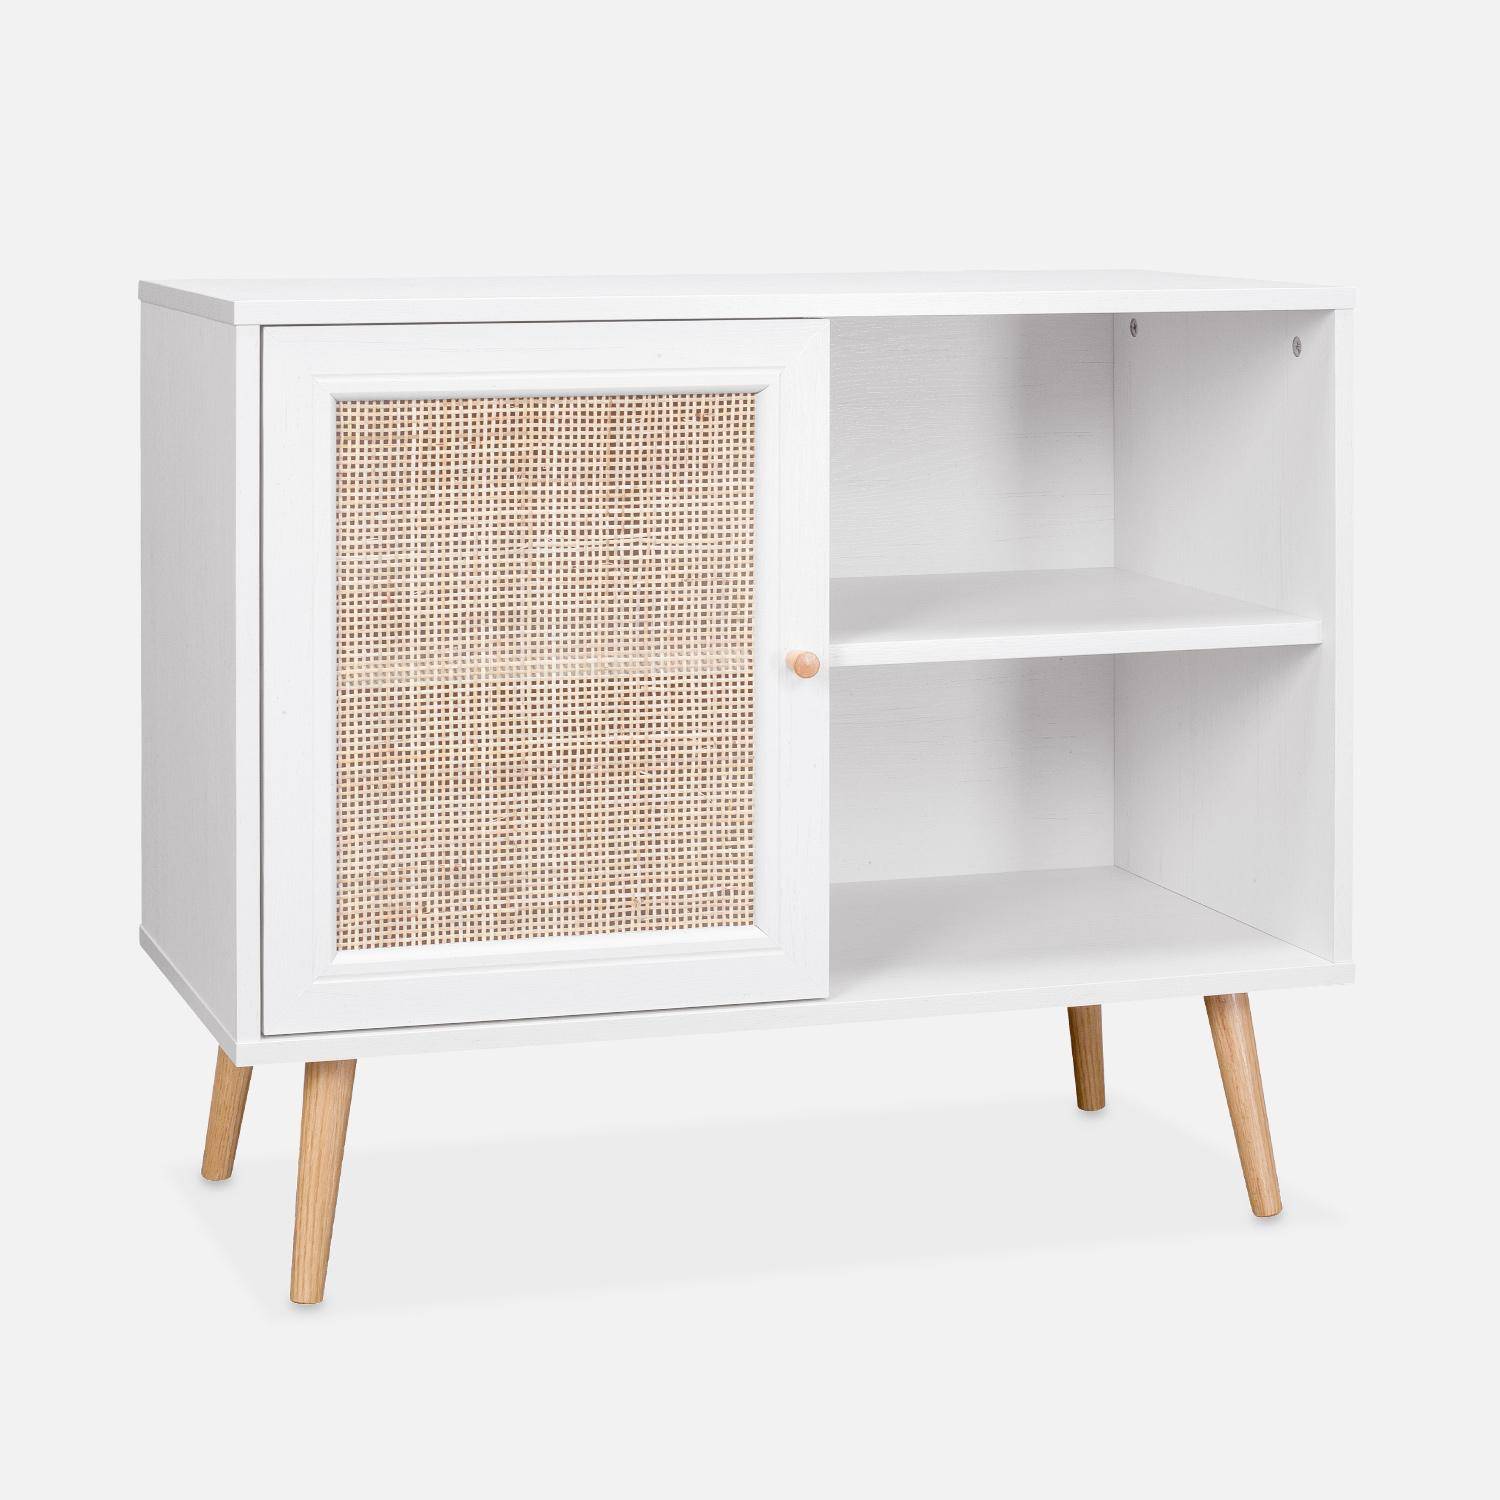 Wooden and cane rattan detail storage cabinet with 2 shelves, 1 cupboard, Scandi-style legs, 80x39x65.8cm - Boheme - White,sweeek,Photo2